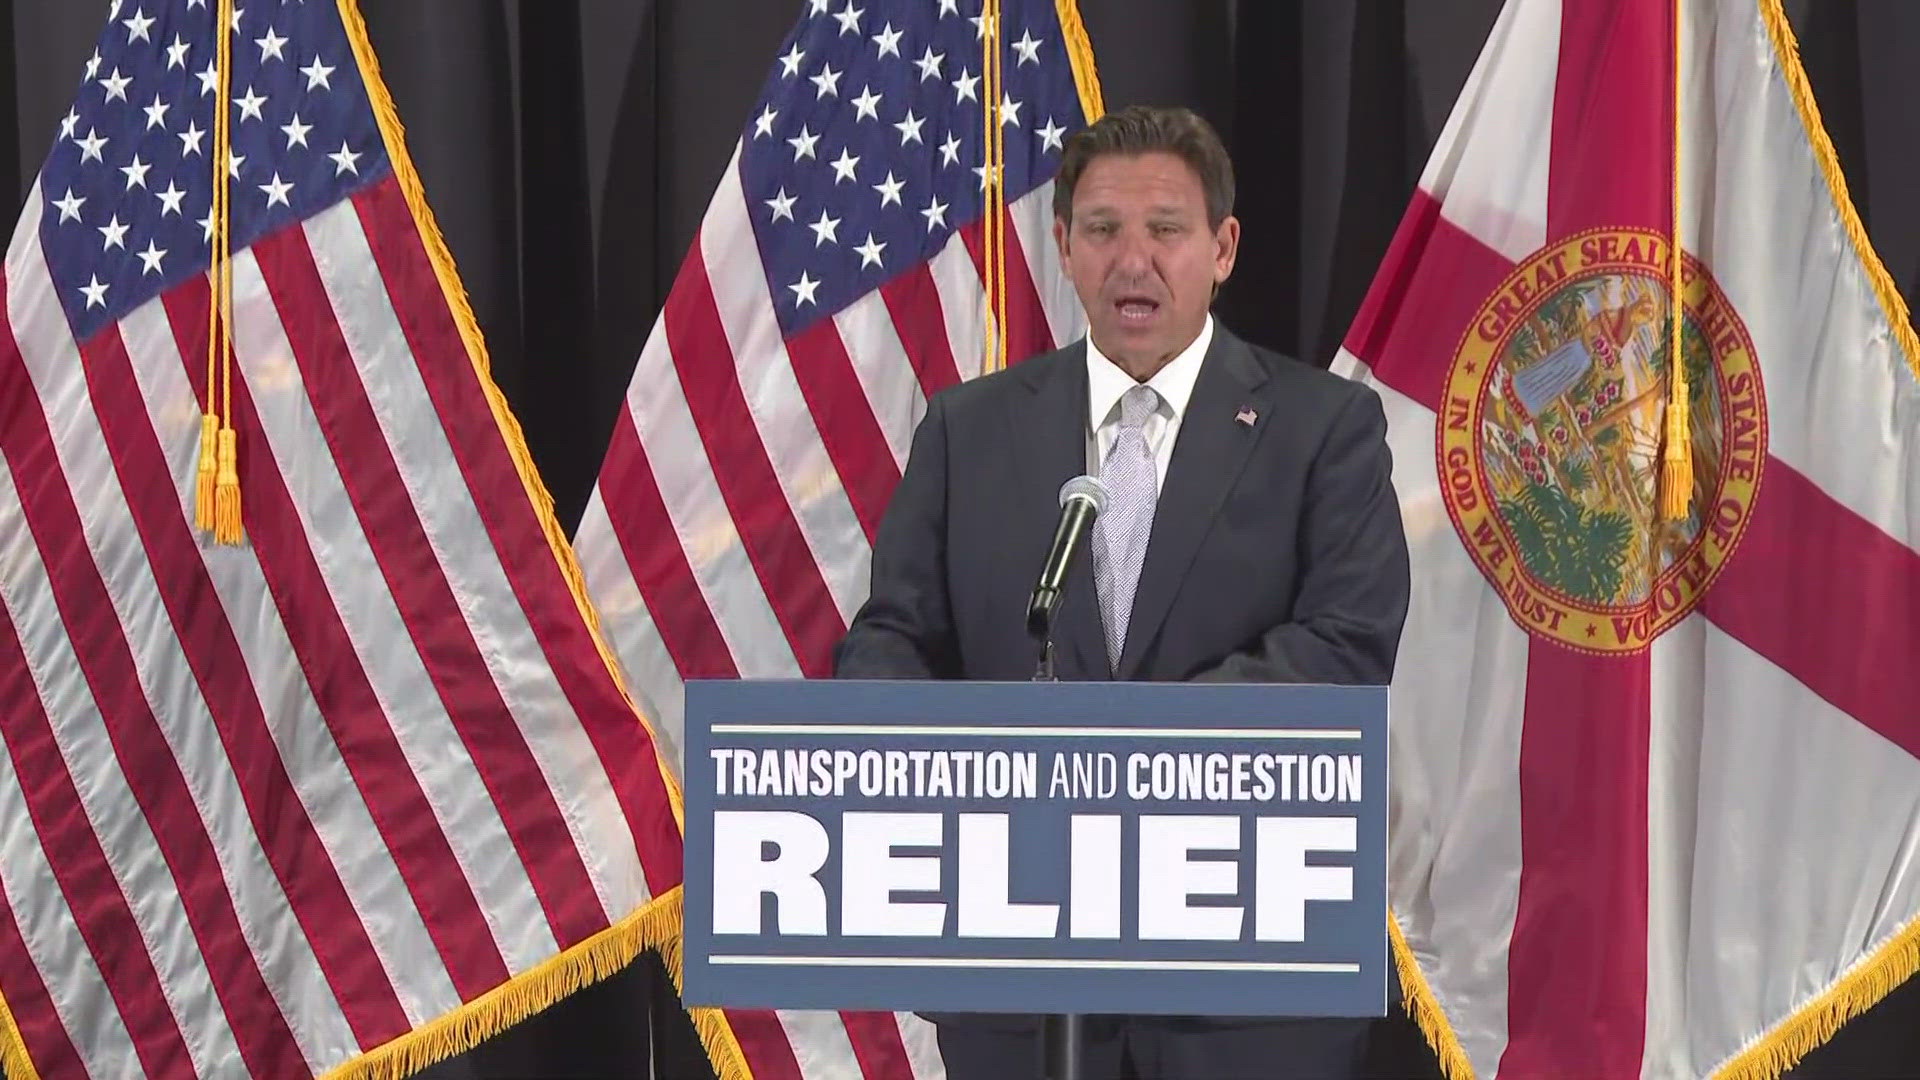 As he announced billions of state dollars are going to Florida roads, Gov. Ron DeSantis is standing firm against accepting federal funds that have "strings attached"